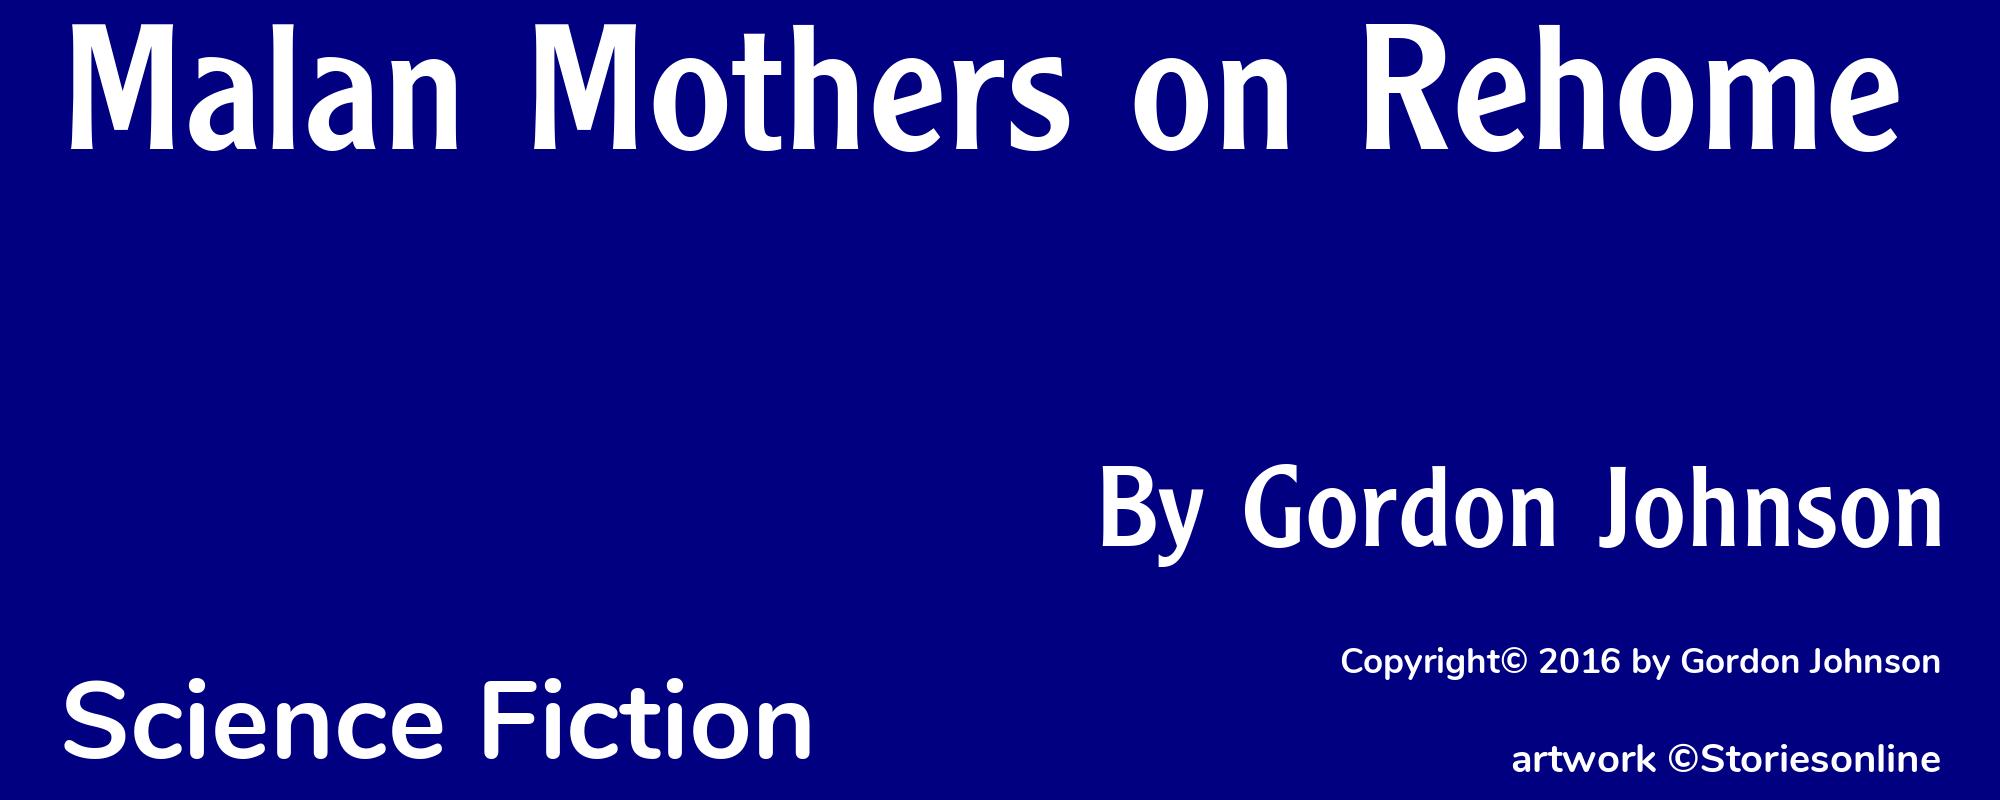 Malan Mothers on Rehome - Cover